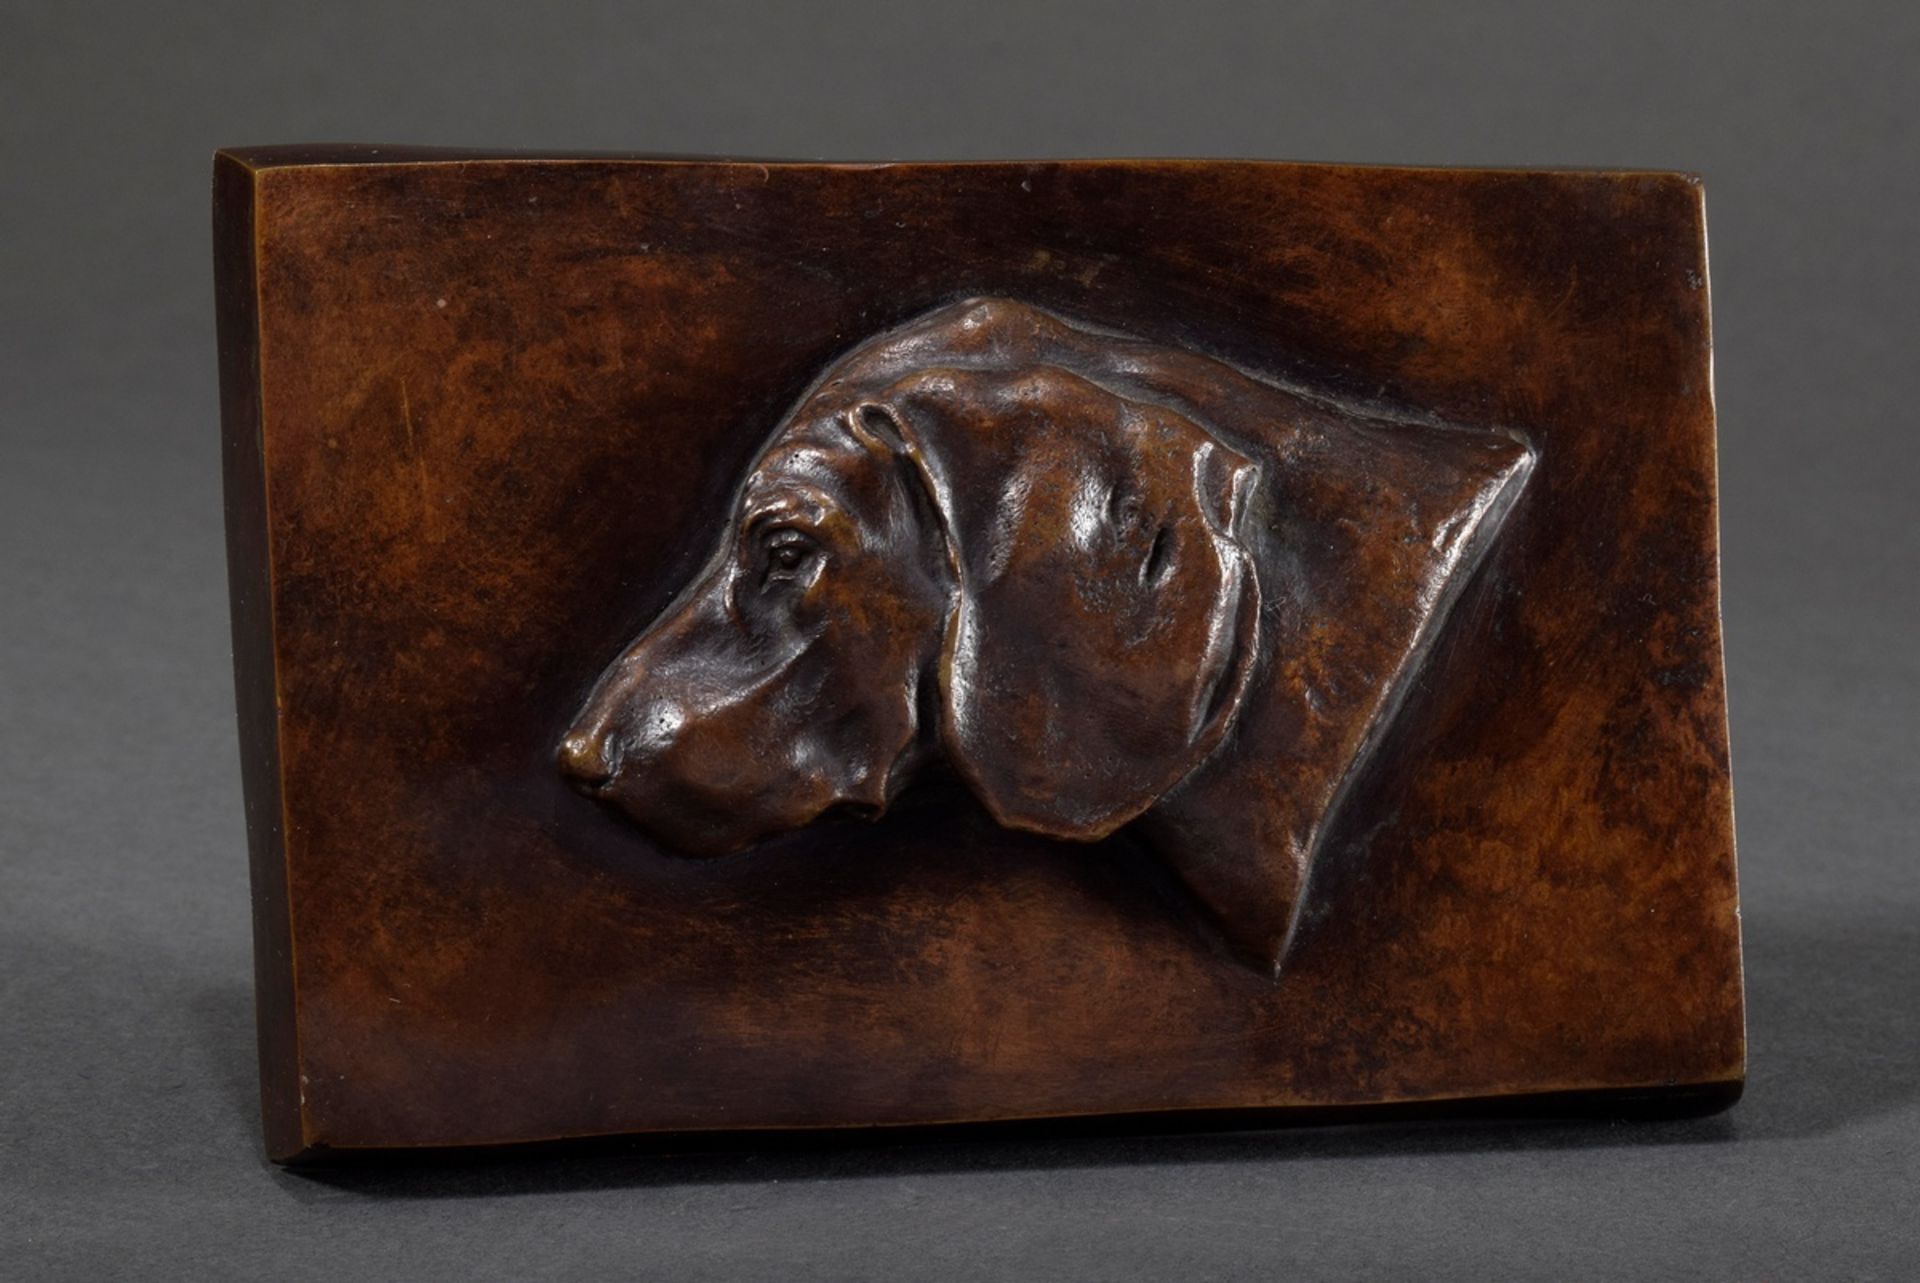 Bronze plaque "Head of a hunting dog", founder's stamp: Noack/Berlin, 11x17cm